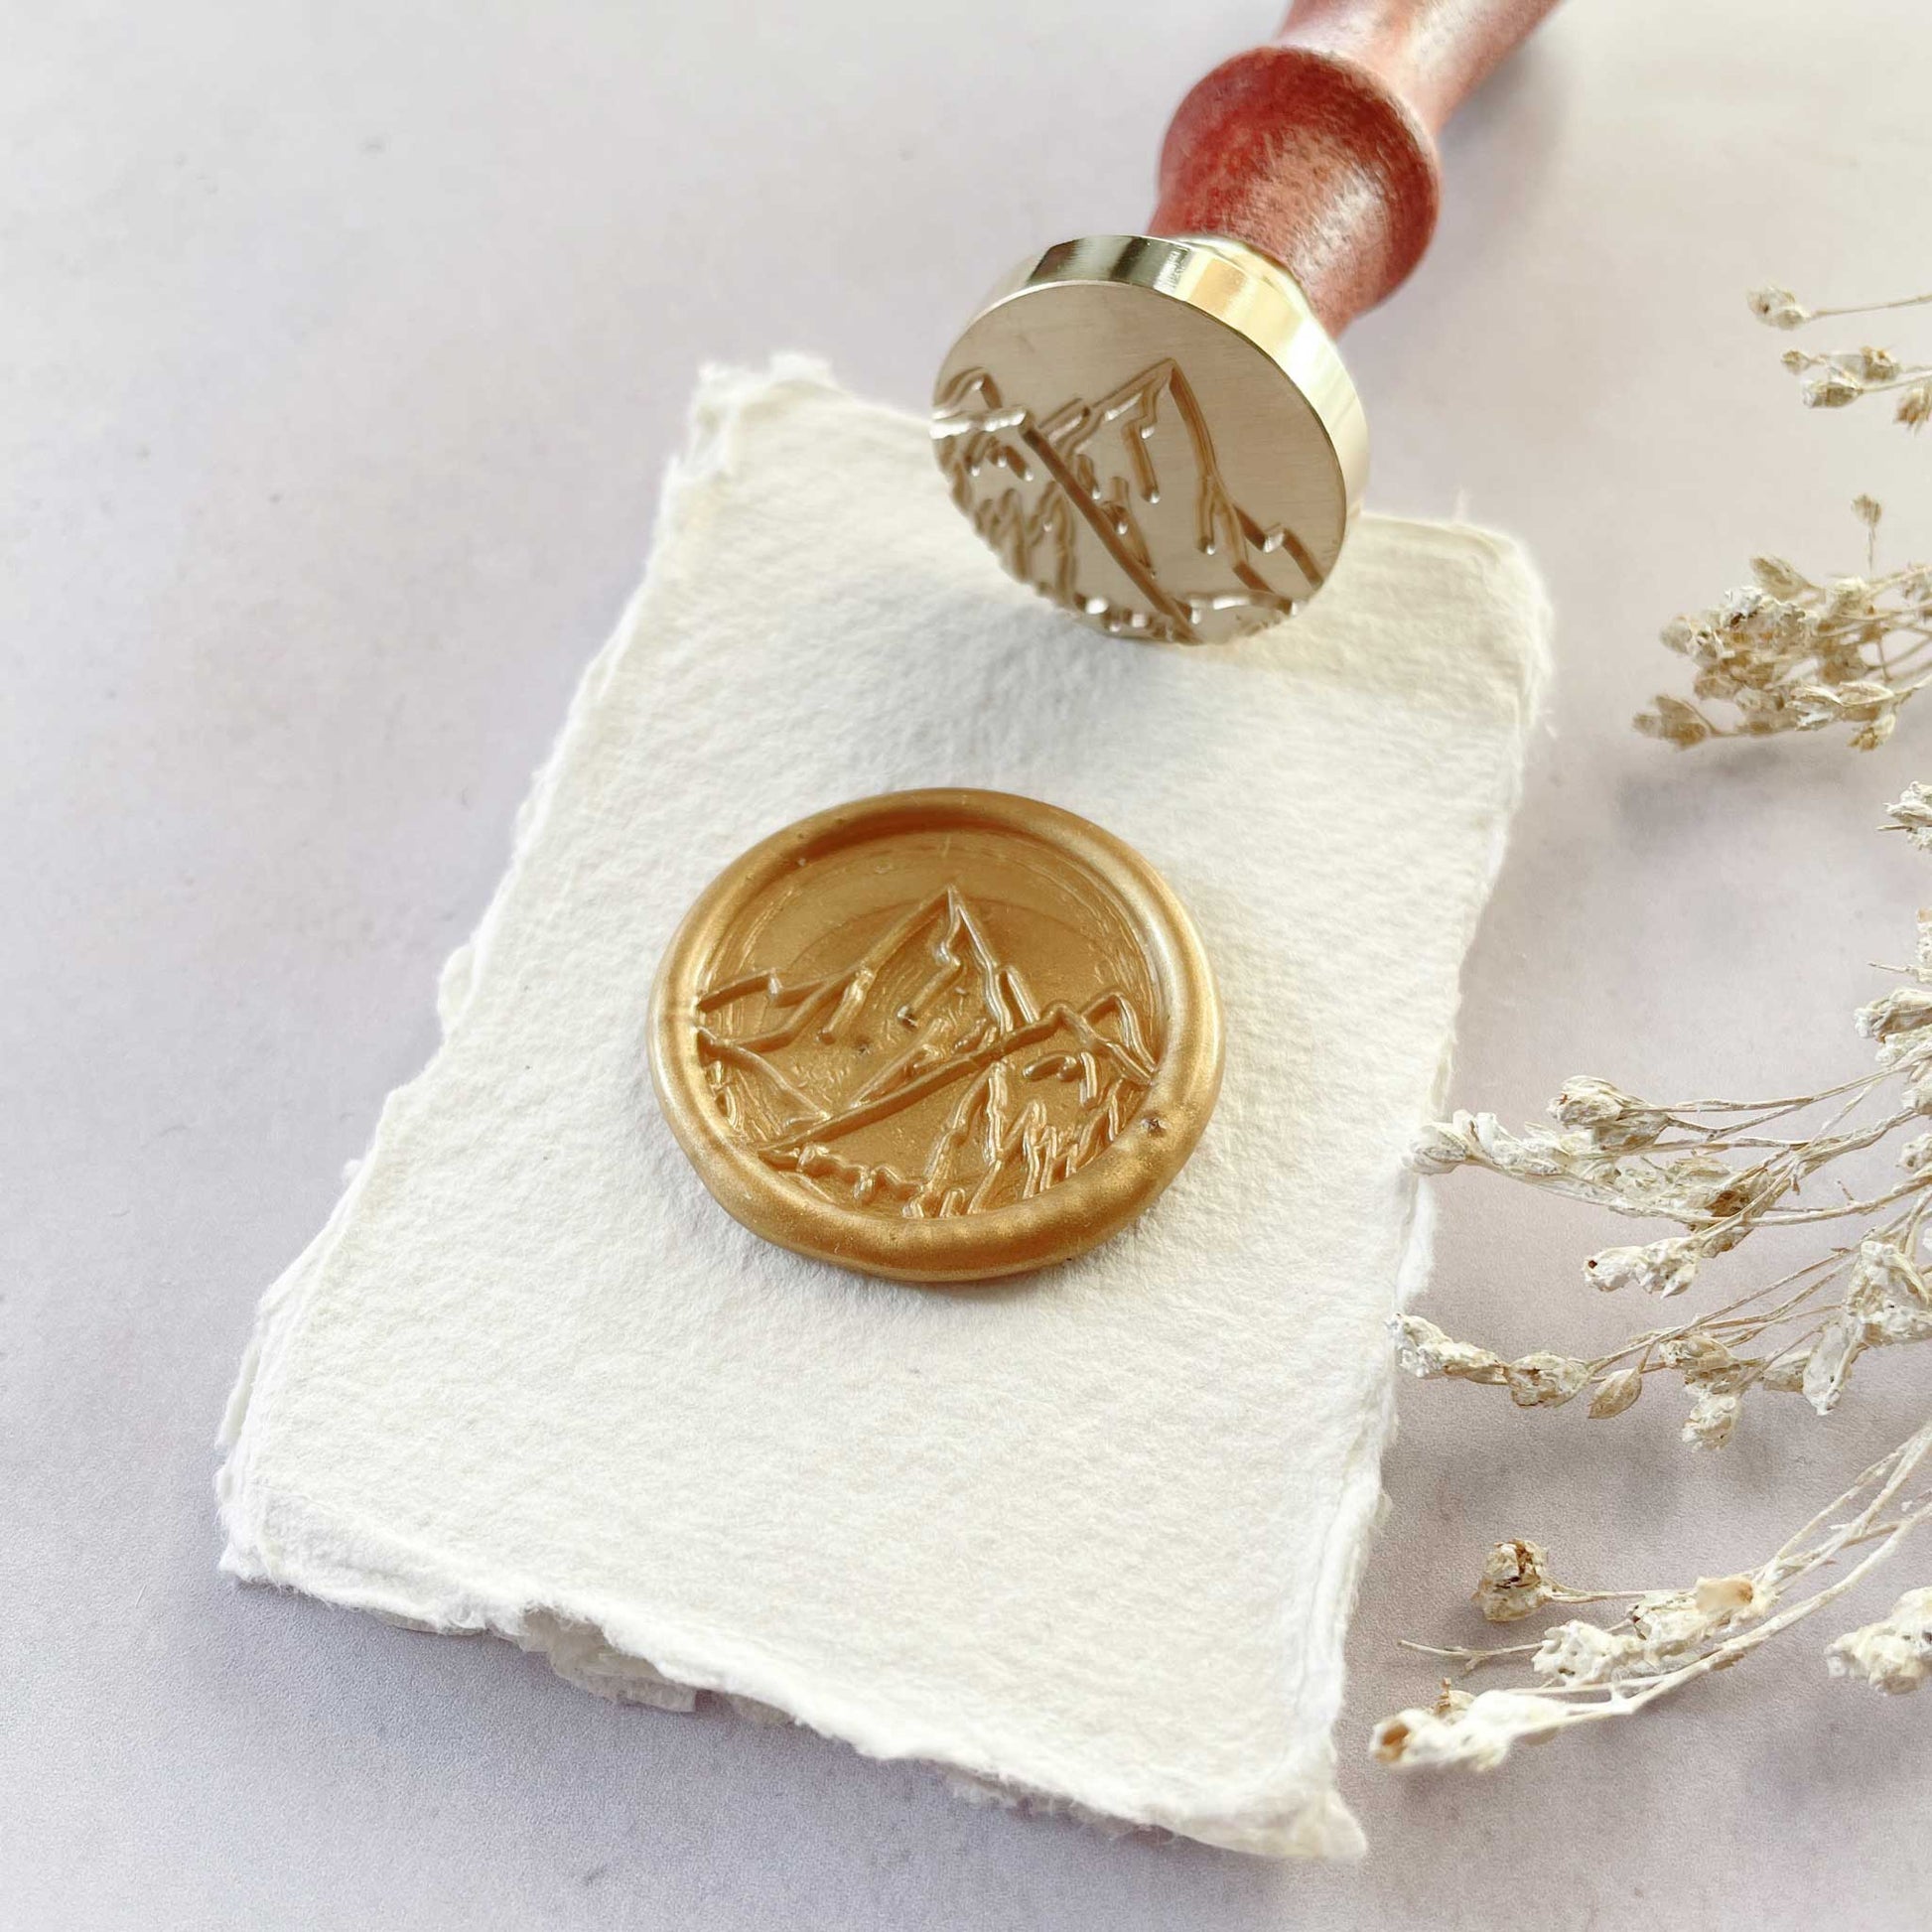 Mountain Peak design wax seals.  Sealing wax stamp for outdoor theme projects.  By The Natural Paper Company